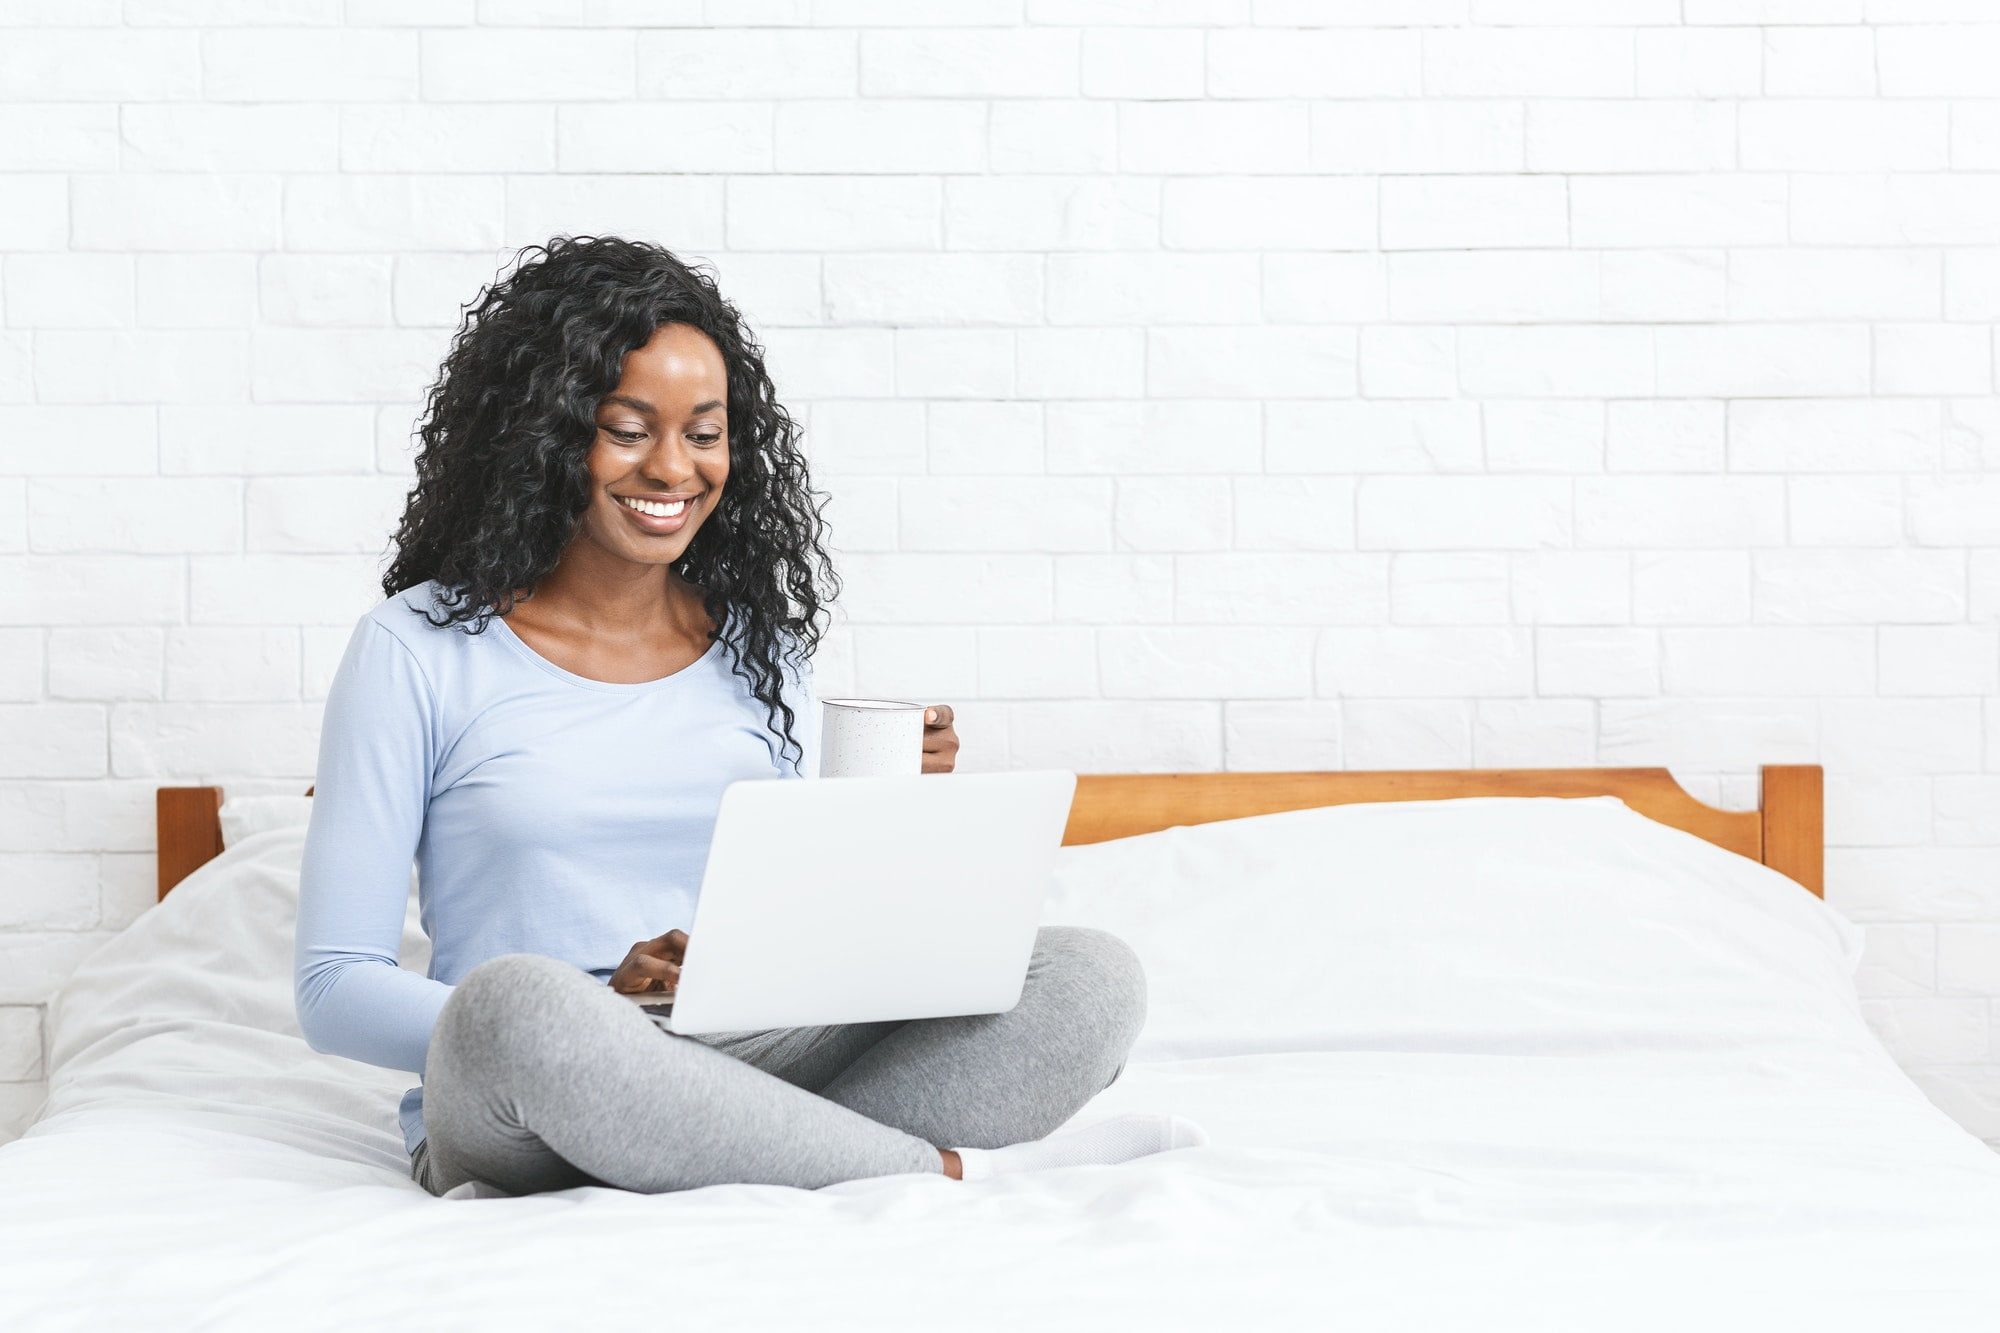 Beautiful smiling young woman sitting on bed, using laptop